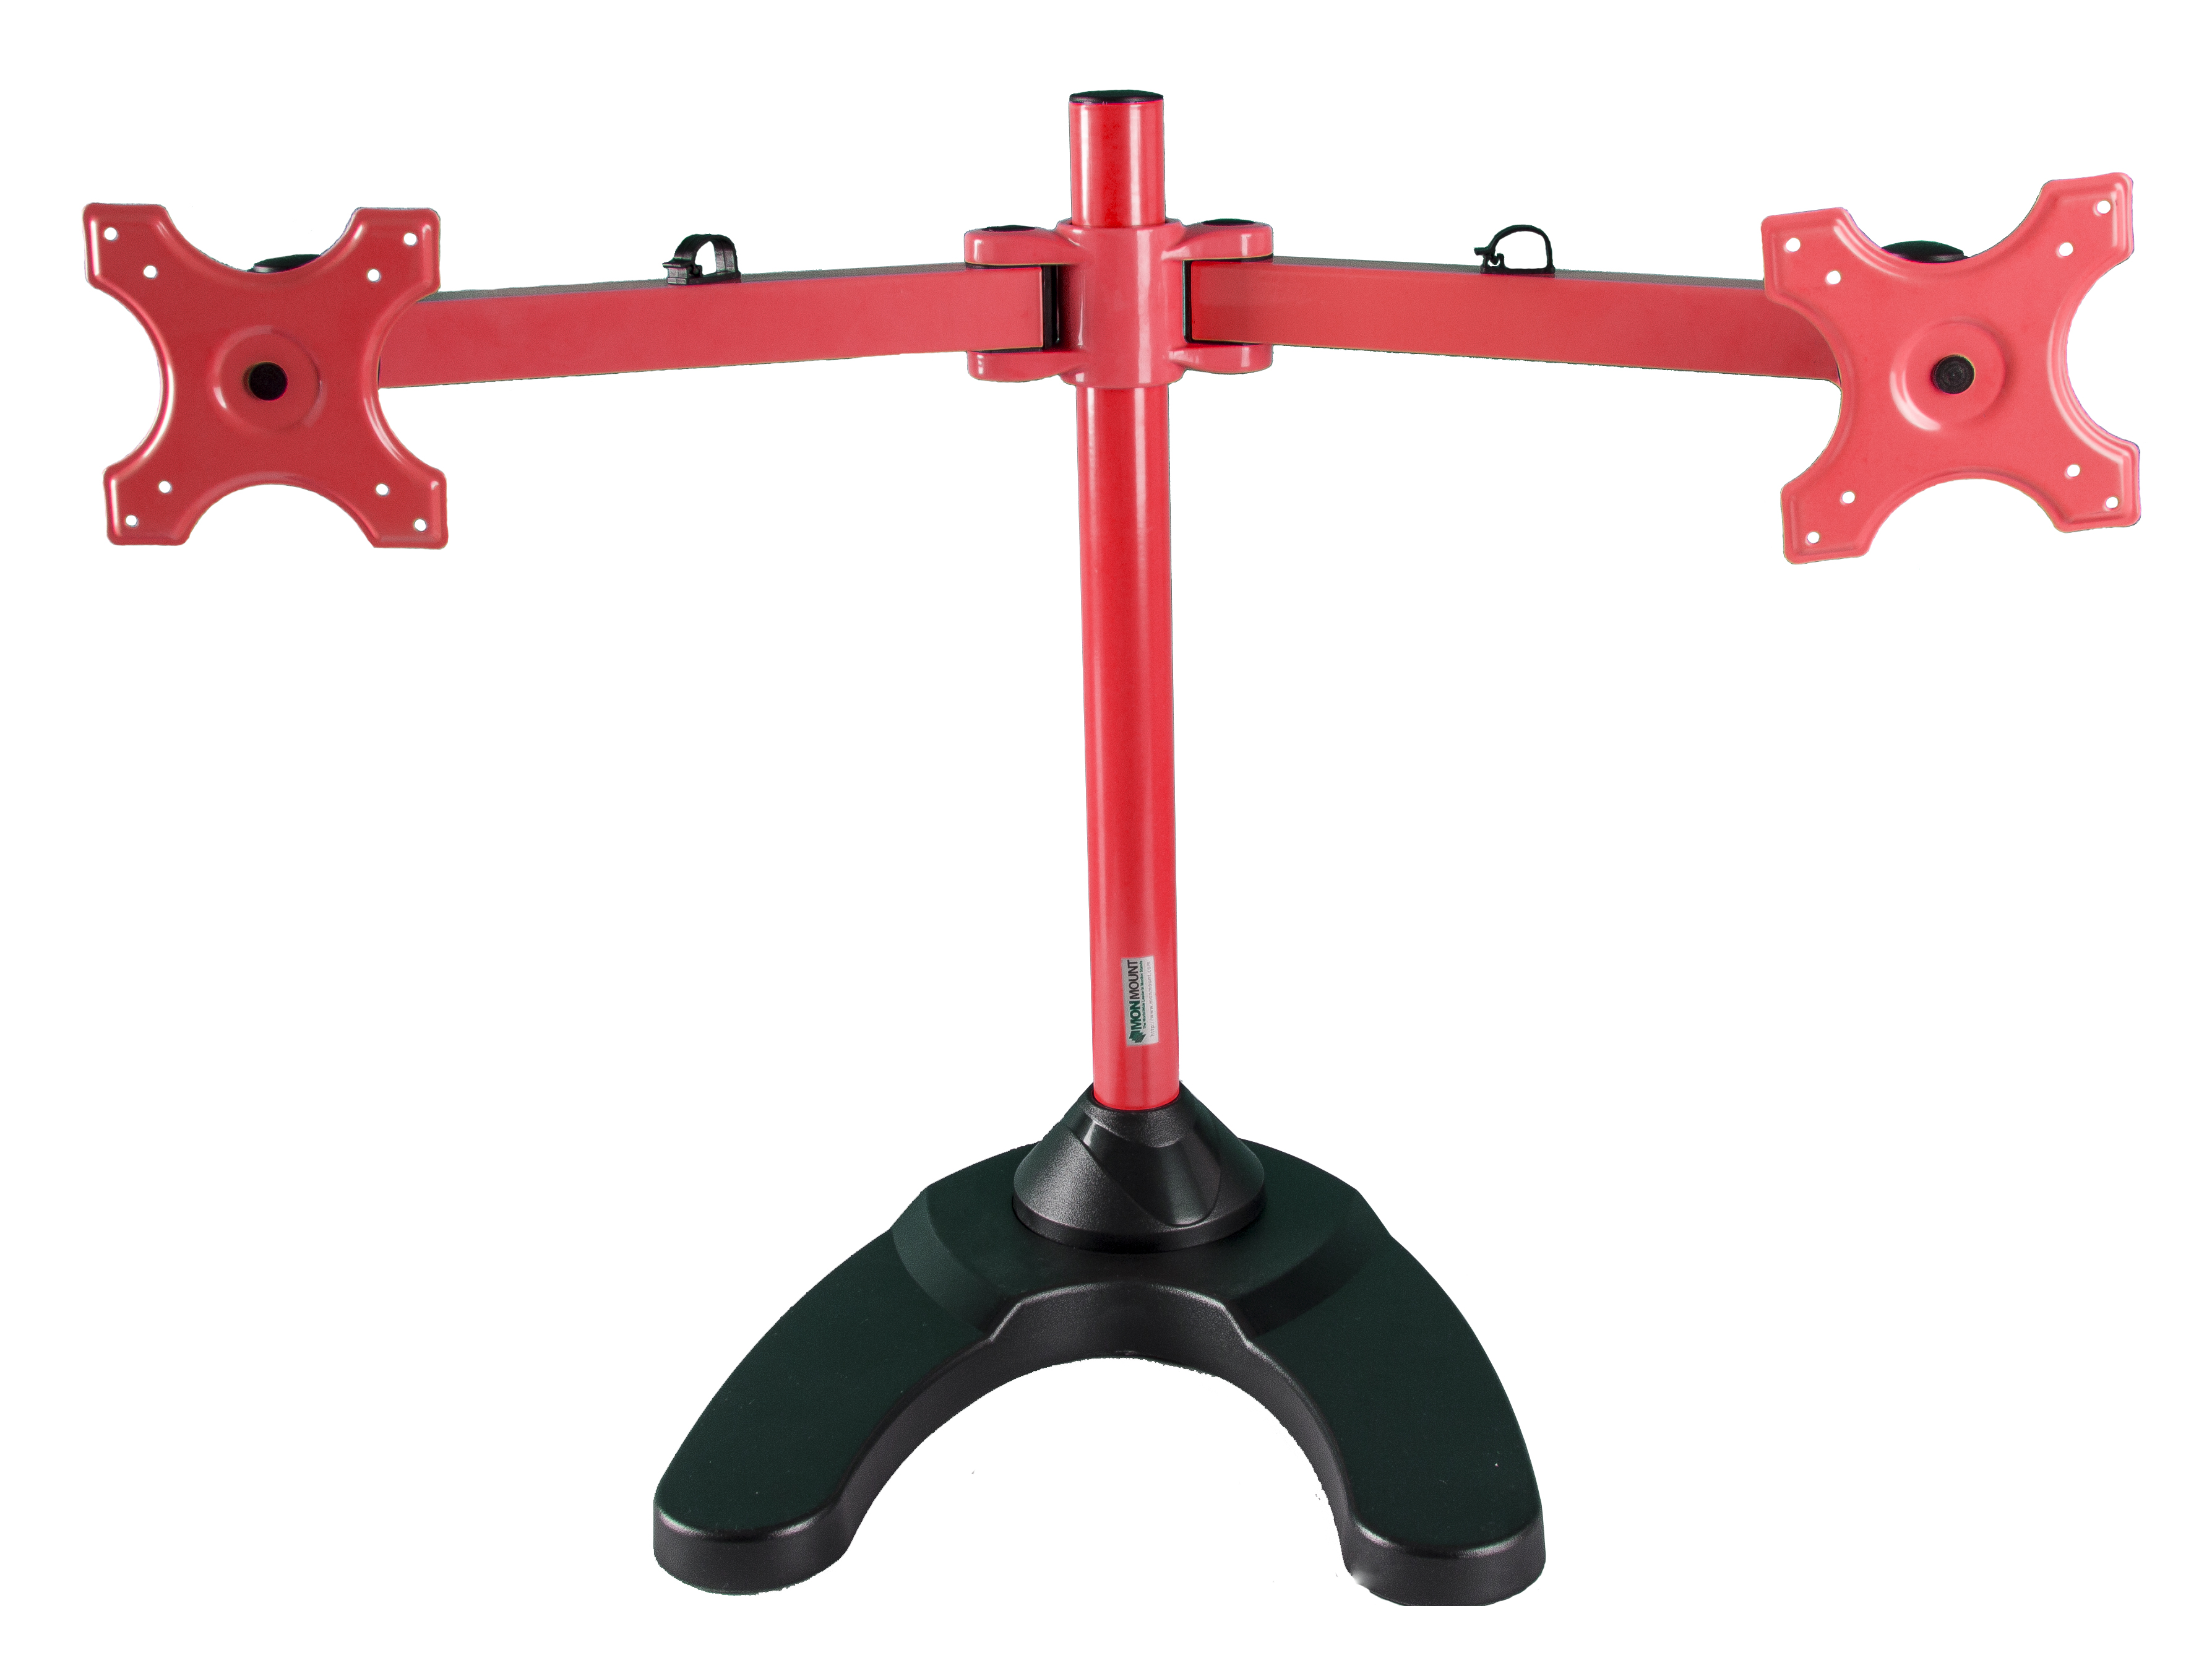 MonMount Dual LCD Freestanding Monitor Stand Up to 24 Inch, Red (LCD 6460R) 